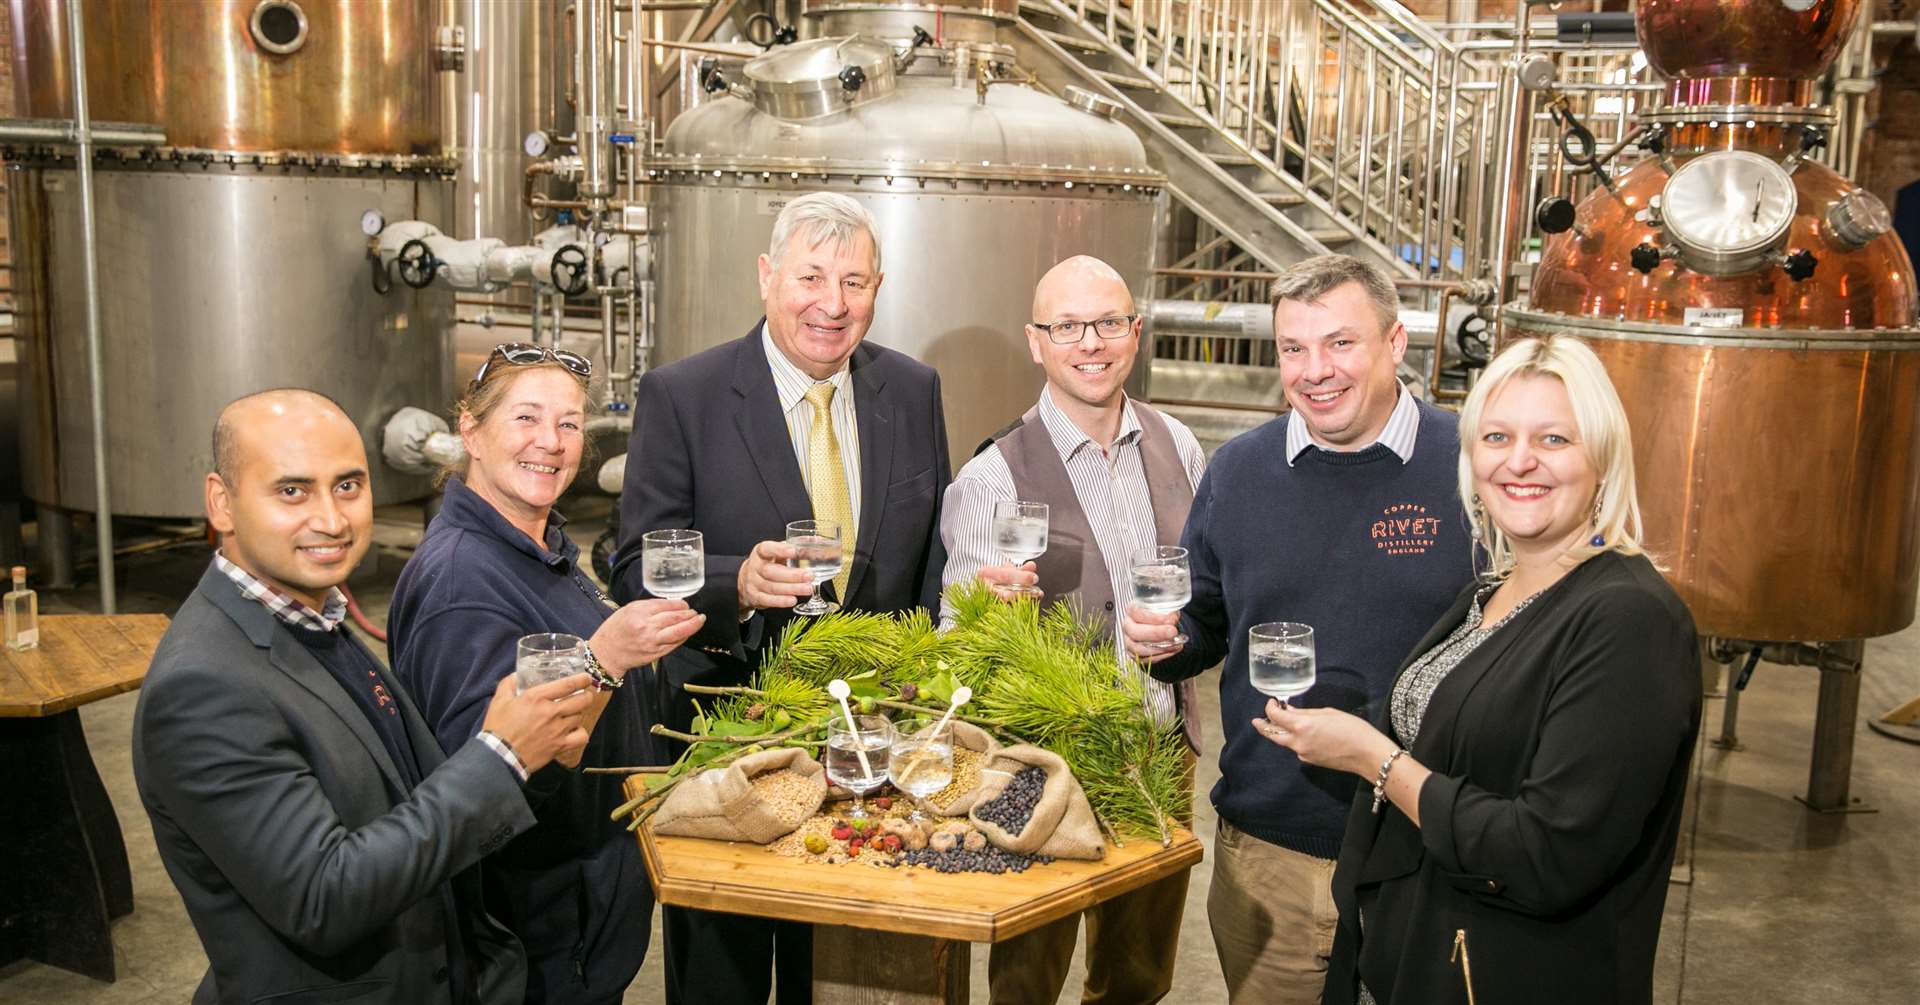 Leeds Castle has teamed up with Copper Rivet Distillery in Medway to produce a special edition Motte & Baillie Gin. Picture: www.matthewwalkerphotography.com